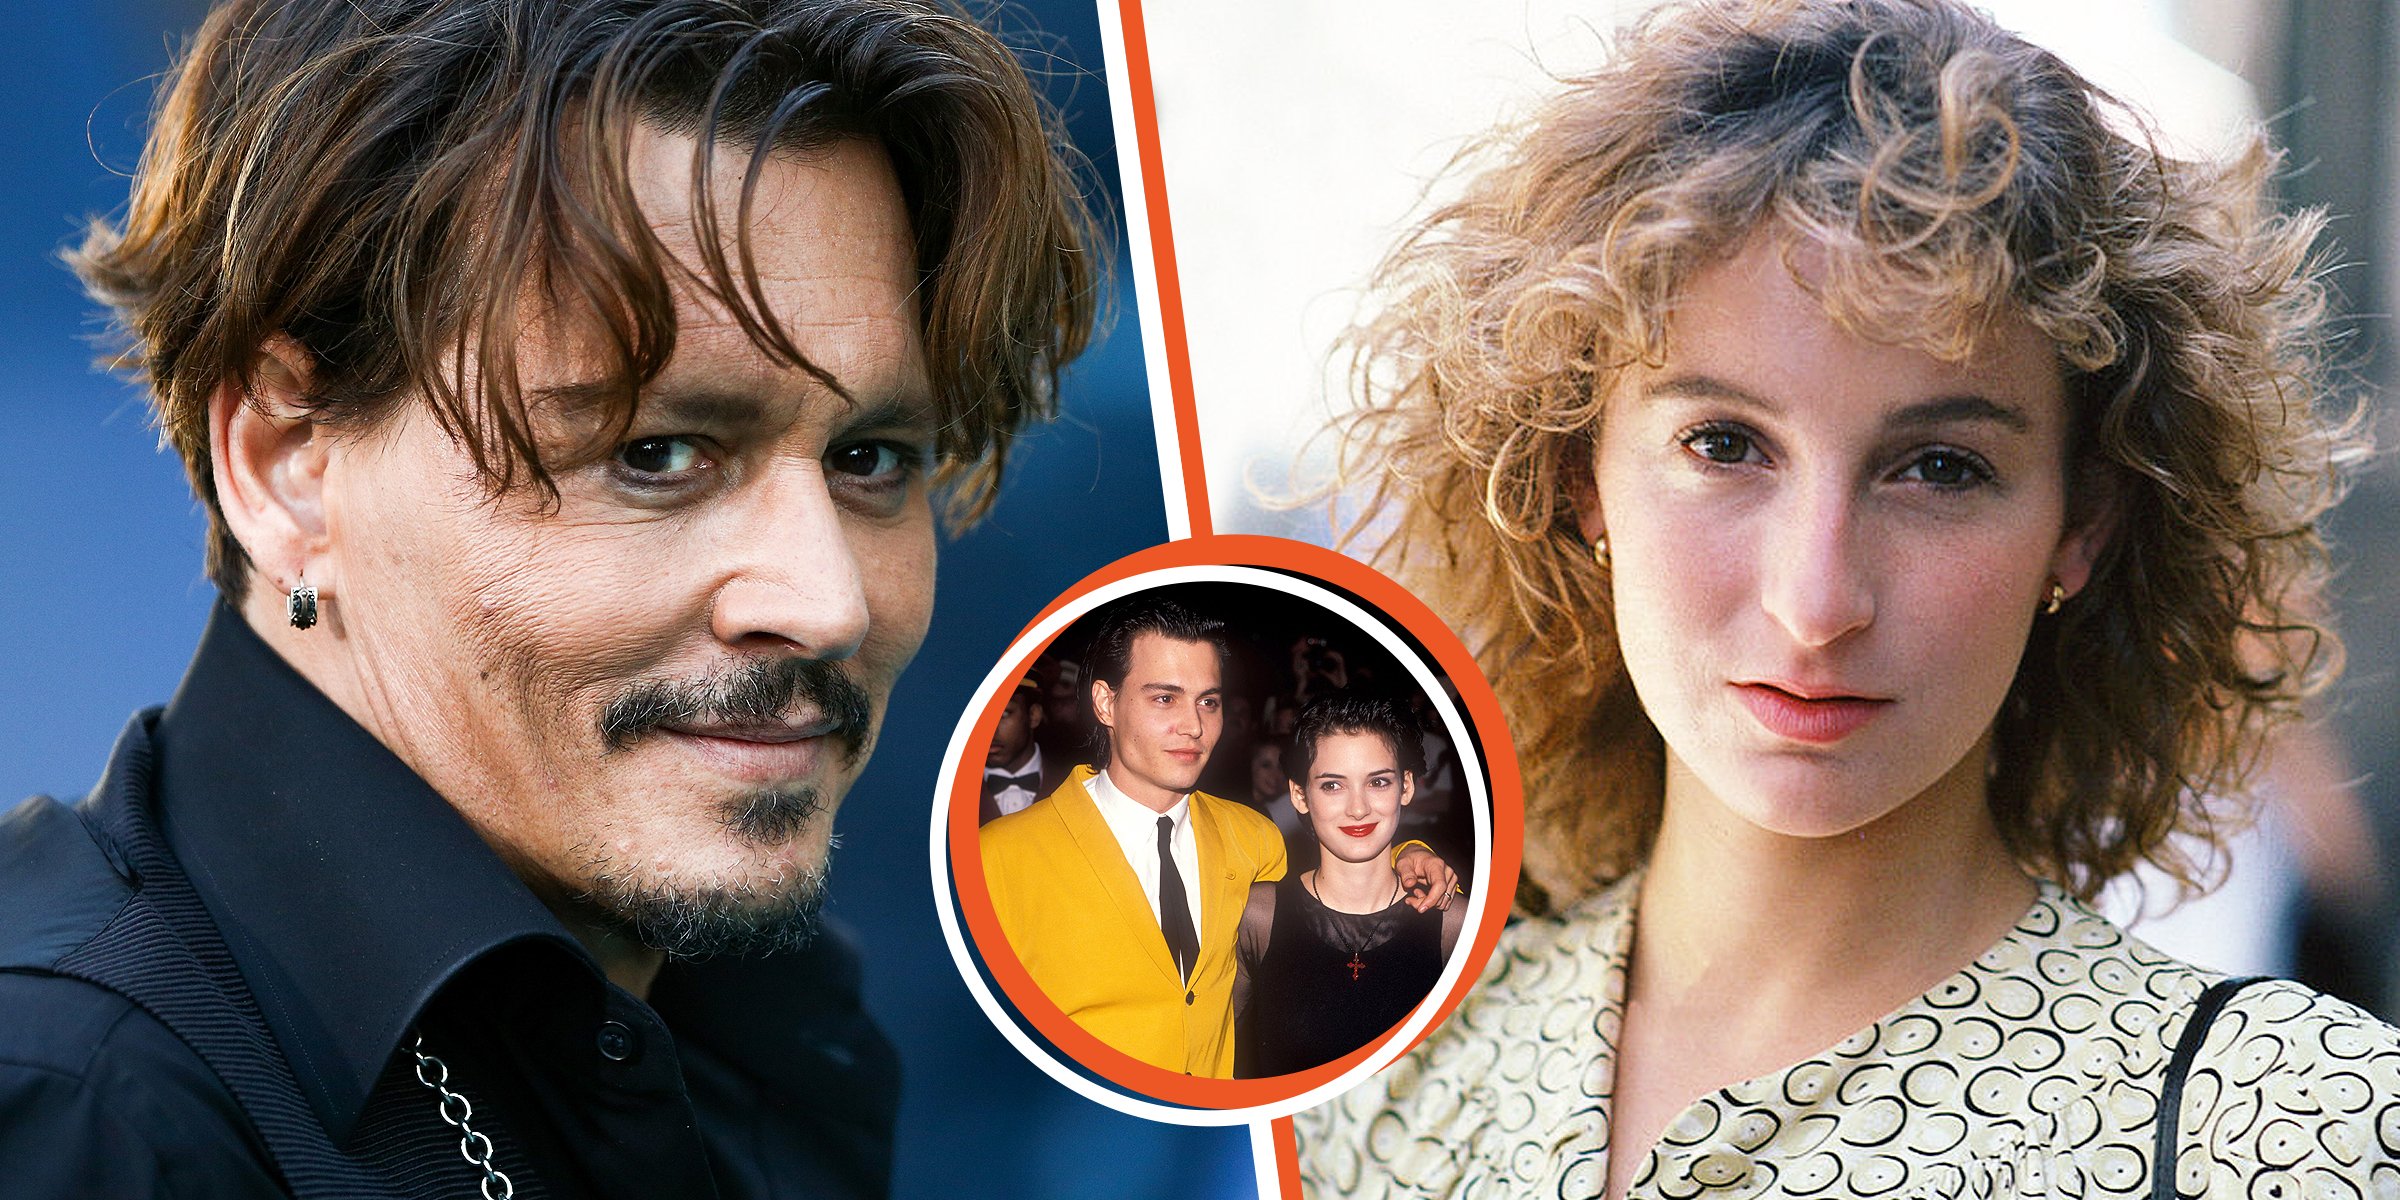 Jennifer Grey Had 'Bonfire' Love with Johnny Depp Yet He Moved on with Her 'Neighbor' - Inside His Romances